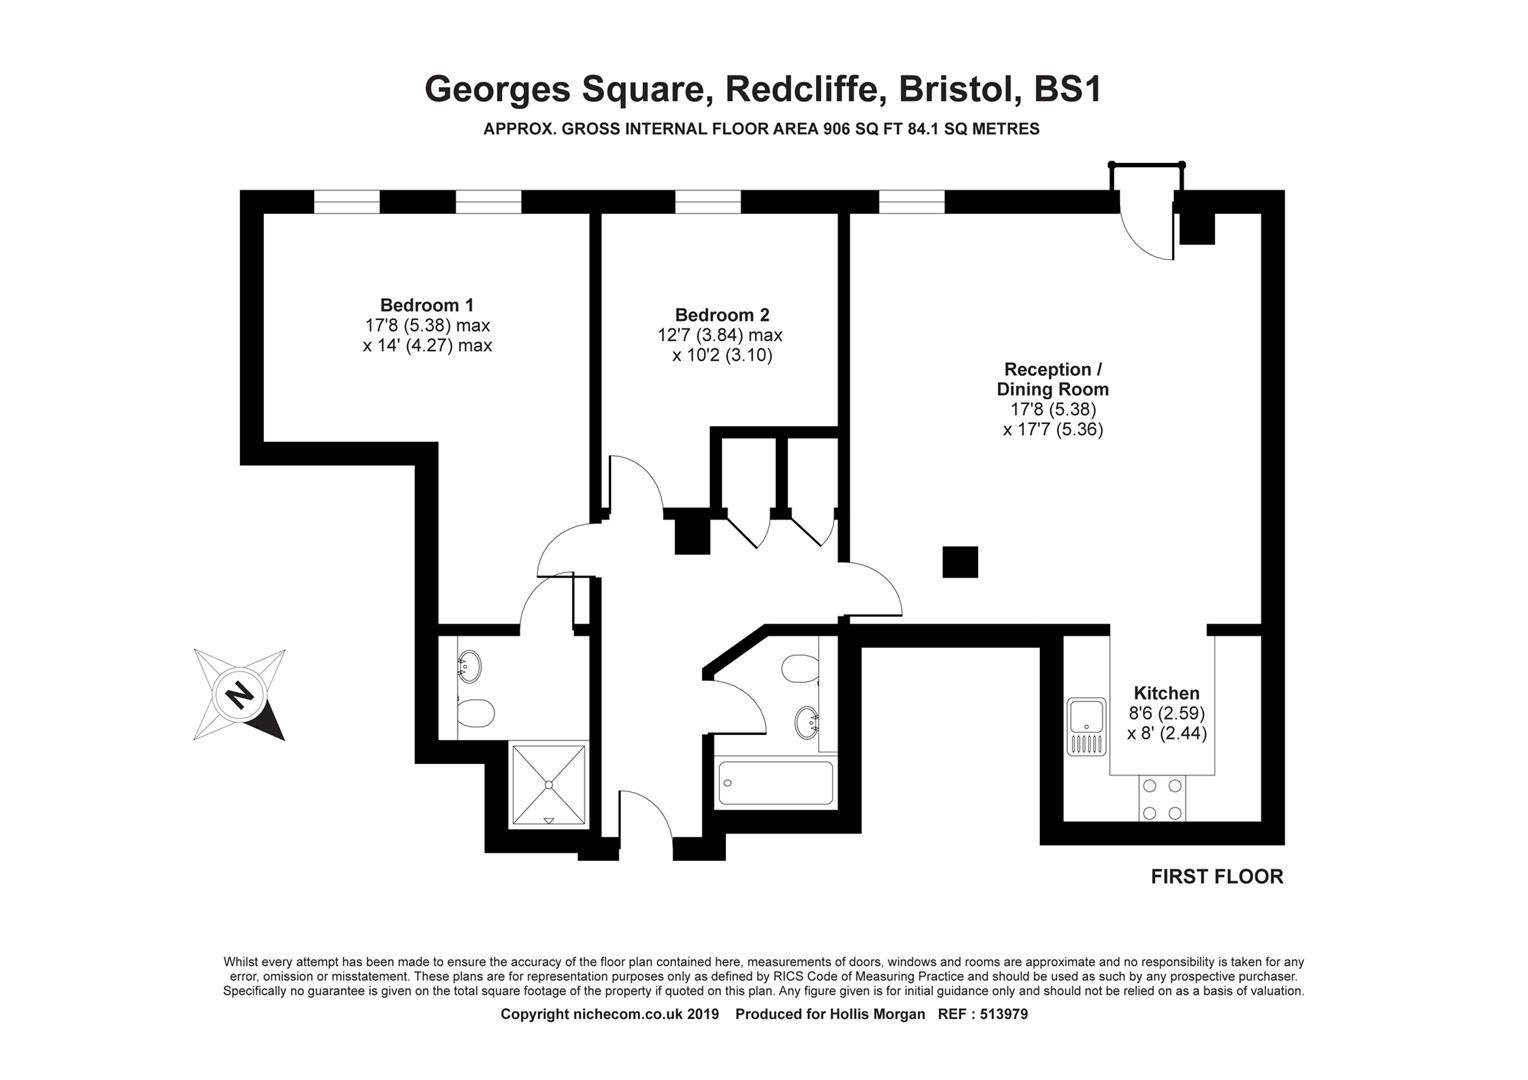 Floorplans For Georges Square, Redcliffe